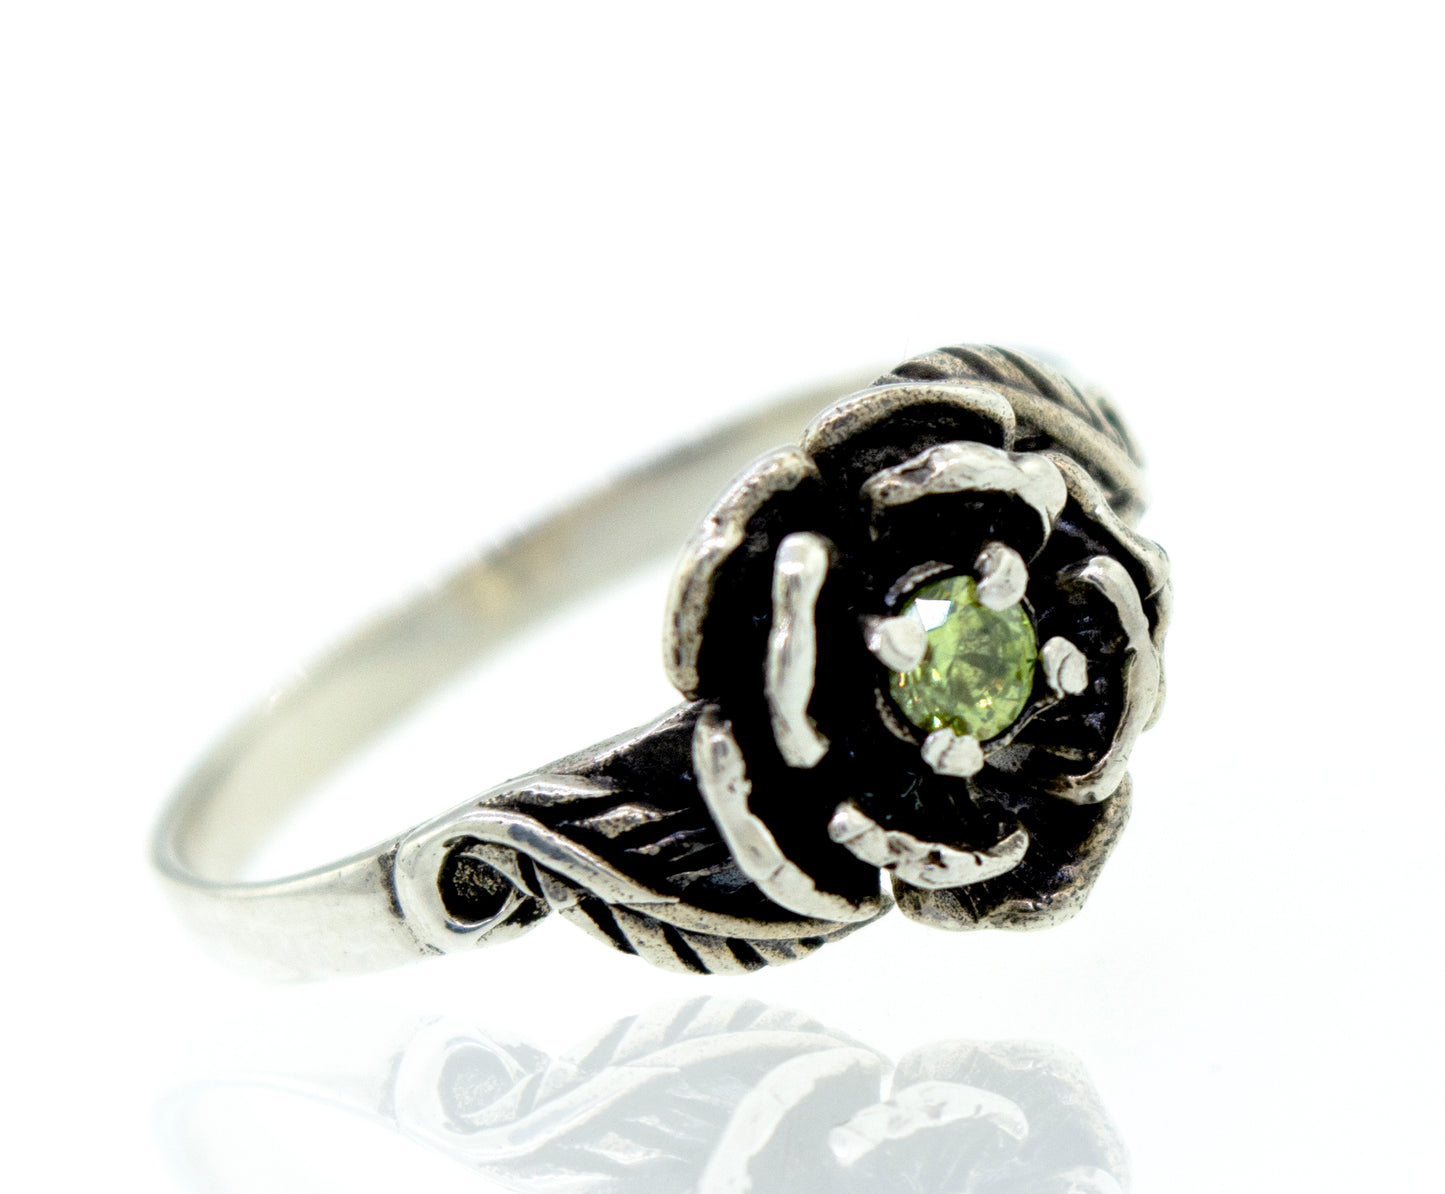 A Rose Ring With Green CZ Stone with a peridot stone.